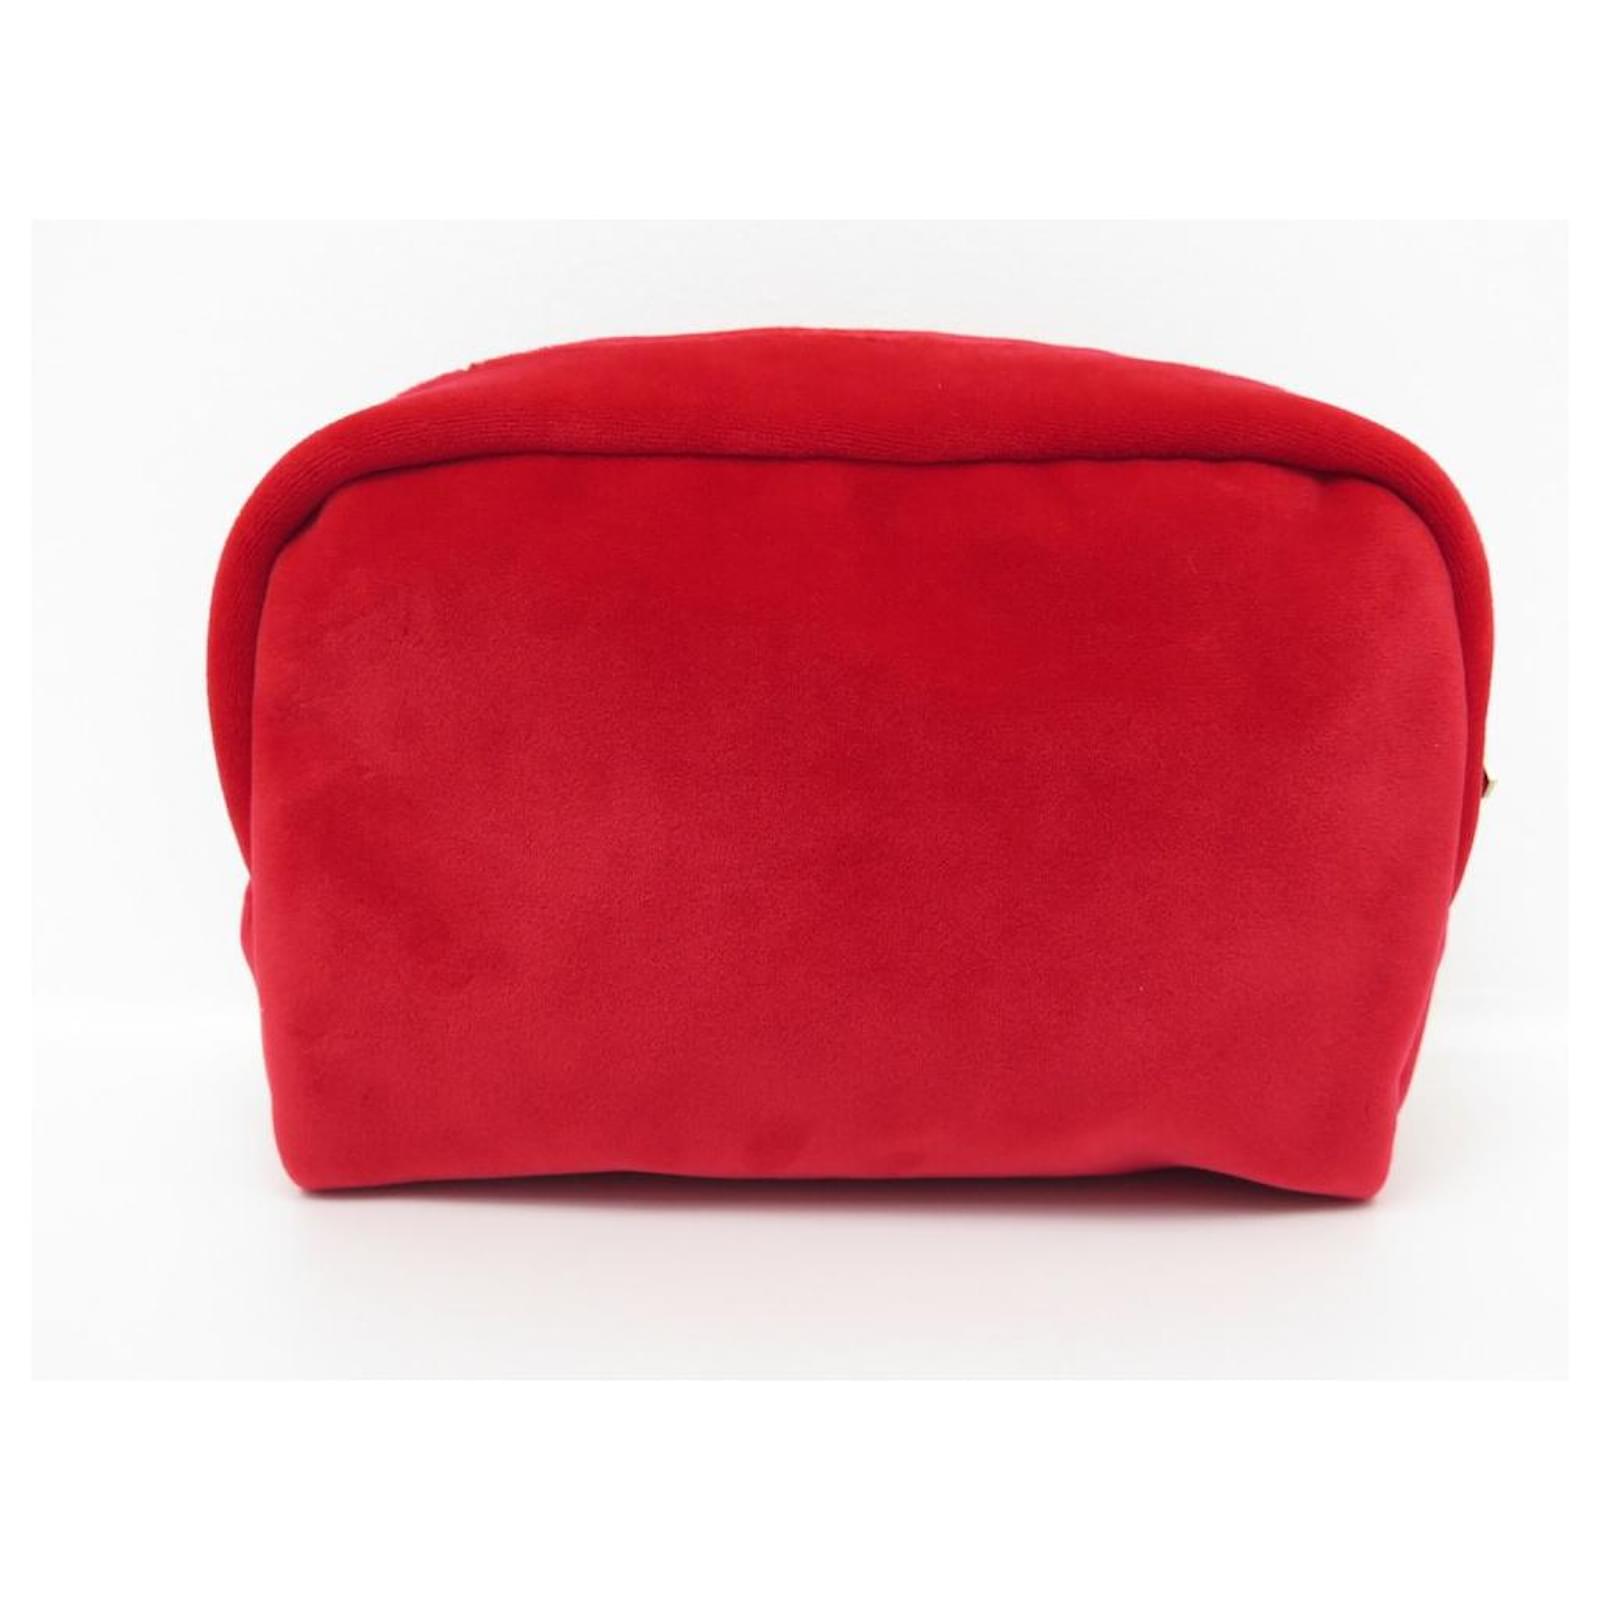 NEW CHANEL BEAUTE TOILETRY BAG IN RED VELVET POLYESTER NEW RED POUCH  ref.721901 - Joli Closet